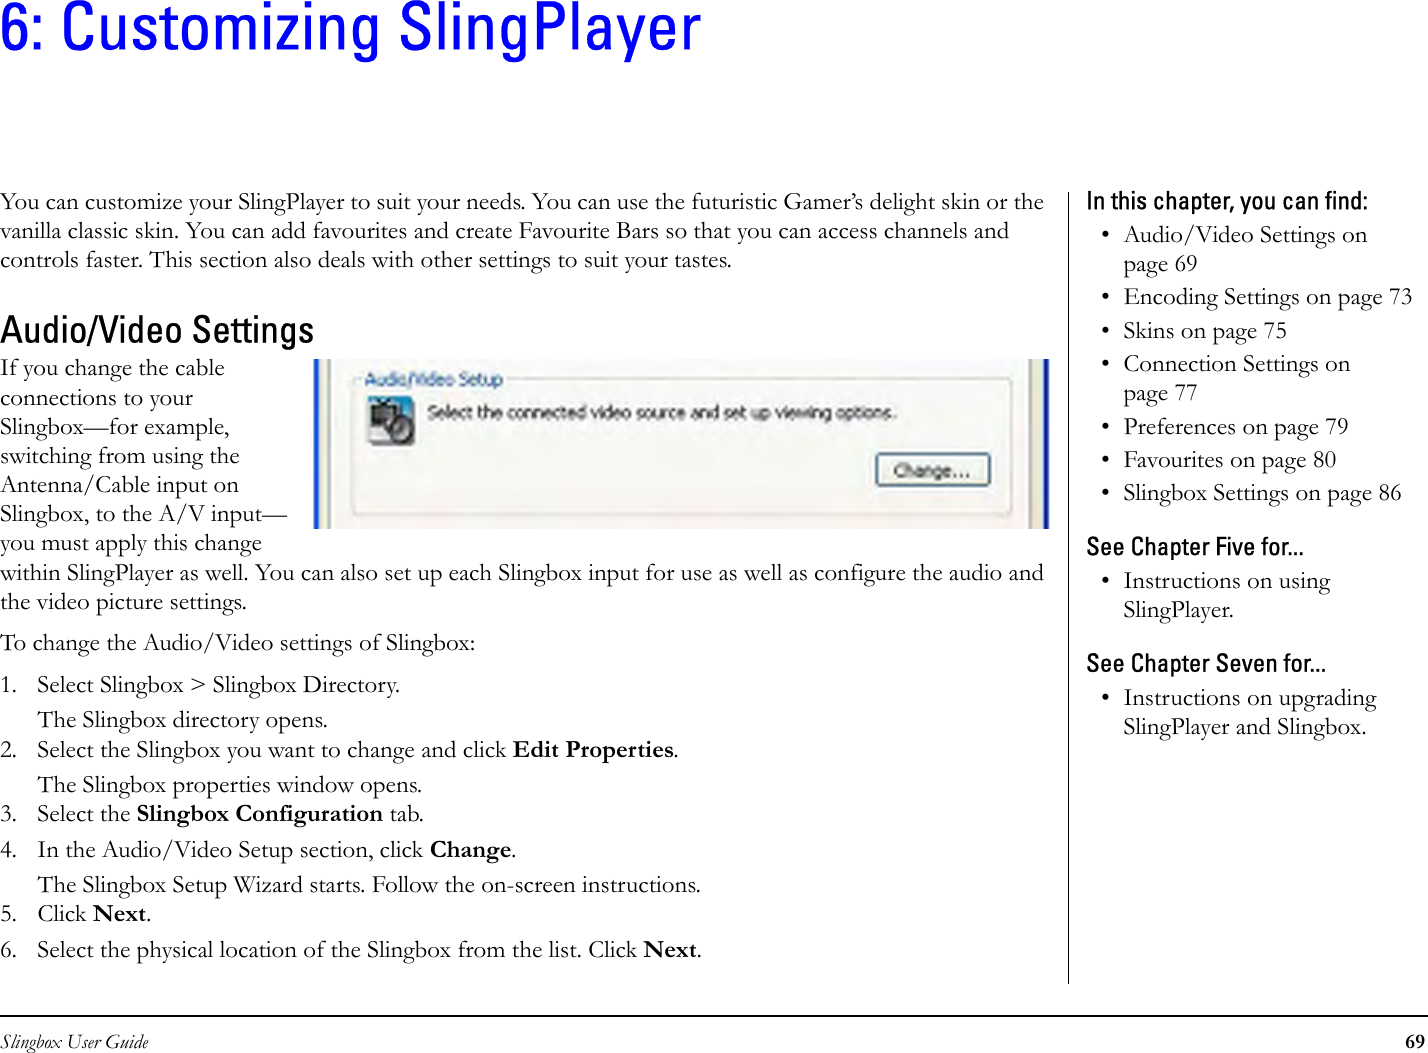 Slingbox User Guide 696: Customizing SlingPlayerYou can customize your SlingPlayer to suit your needs. You can use the futuristic Gamer’s delight skin or the vanilla classic skin. You can add favourites and create Favourite Bars so that you can access channels and controls faster. This section also deals with other settings to suit your tastes.Audio/Video SettingsIf you change the cable connections to your Slingbox—for example, switching from using the Antenna/Cable input on Slingbox, to the A/V input—you must apply this change within SlingPlayer as well. You can also set up each Slingbox input for use as well as configure the audio and the video picture settings. To change the Audio/Video settings of Slingbox:1. Select Slingbox &gt; Slingbox Directory.The Slingbox directory opens.2. Select the Slingbox you want to change and click Edit Properties.The Slingbox properties window opens.3. Select the Slingbox Configuration tab.4. In the Audio/Video Setup section, click Change.The Slingbox Setup Wizard starts. Follow the on-screen instructions. 5. Click Next. 6. Select the physical location of the Slingbox from the list. Click Next.In this chapter, you can find: • Audio/Video Settings on page 69• Encoding Settings on page 73• Skins on page 75• Connection Settings on page 77• Preferences on page 79• Favourites on page 80• Slingbox Settings on page 86See Chapter Five for...• Instructions on using SlingPlayer.See Chapter Seven for...• Instructions on upgrading SlingPlayer and Slingbox.